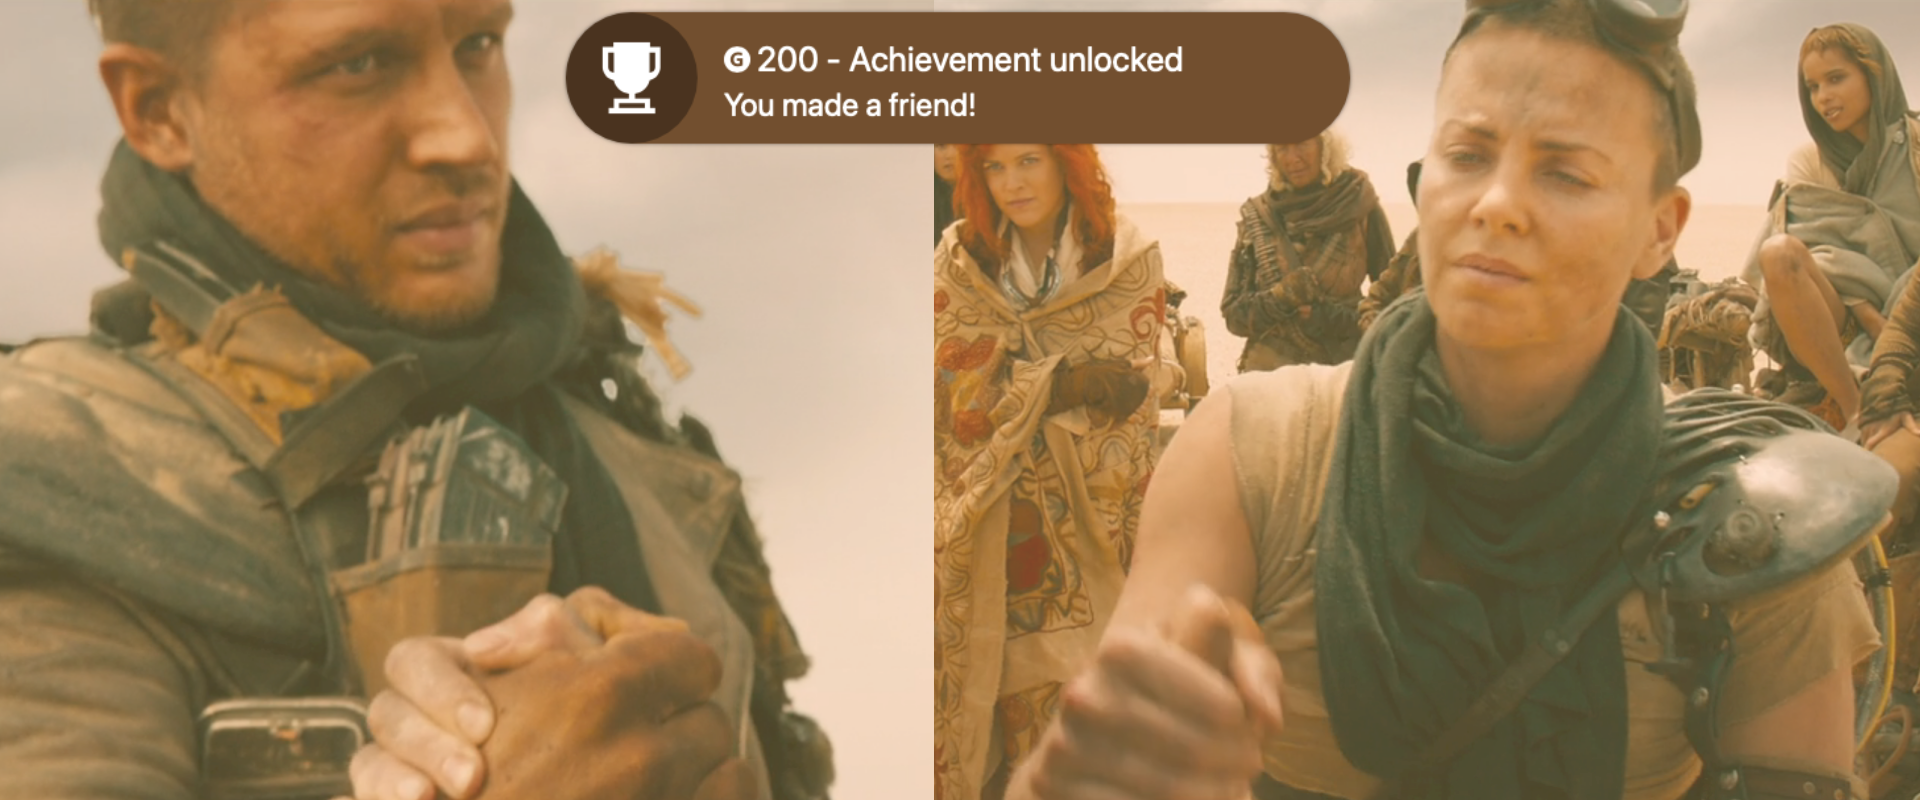 Mad Max Fury Road characters Max and Furiosa shake hands when agreeing to their plan. Overlay of the Gamer Score Achievement Unlocked banner that reads You made a friend!